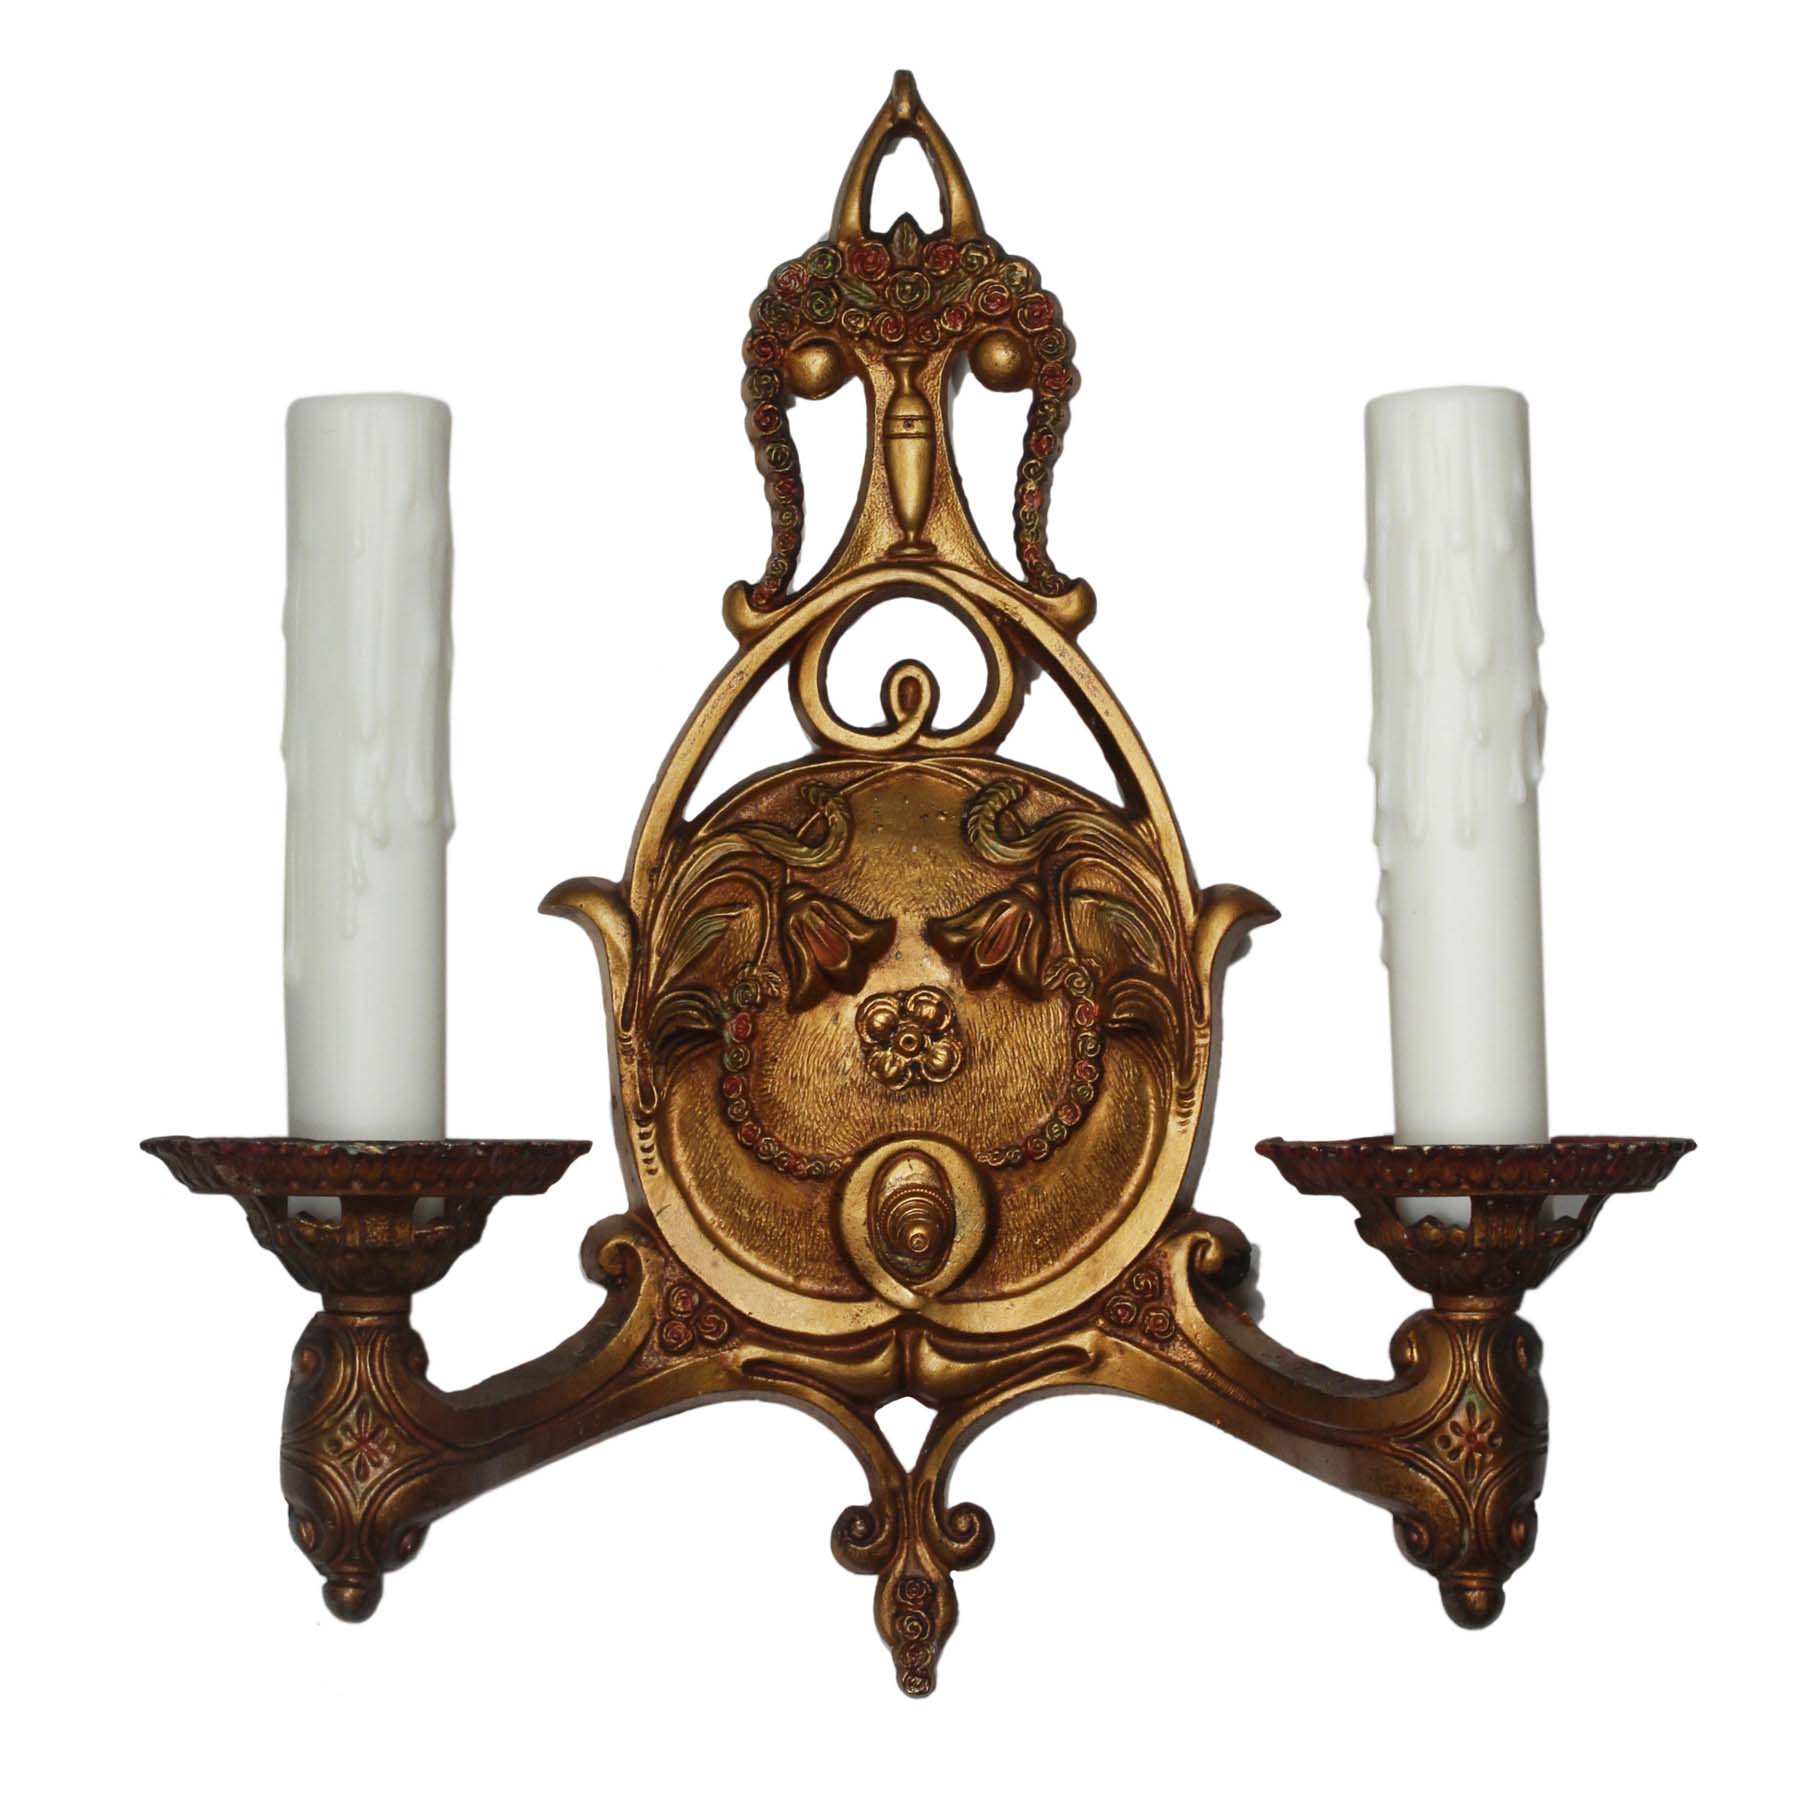 Neoclassical Double Arm Sconces with Original Polychrome, Antique Lighting-71747